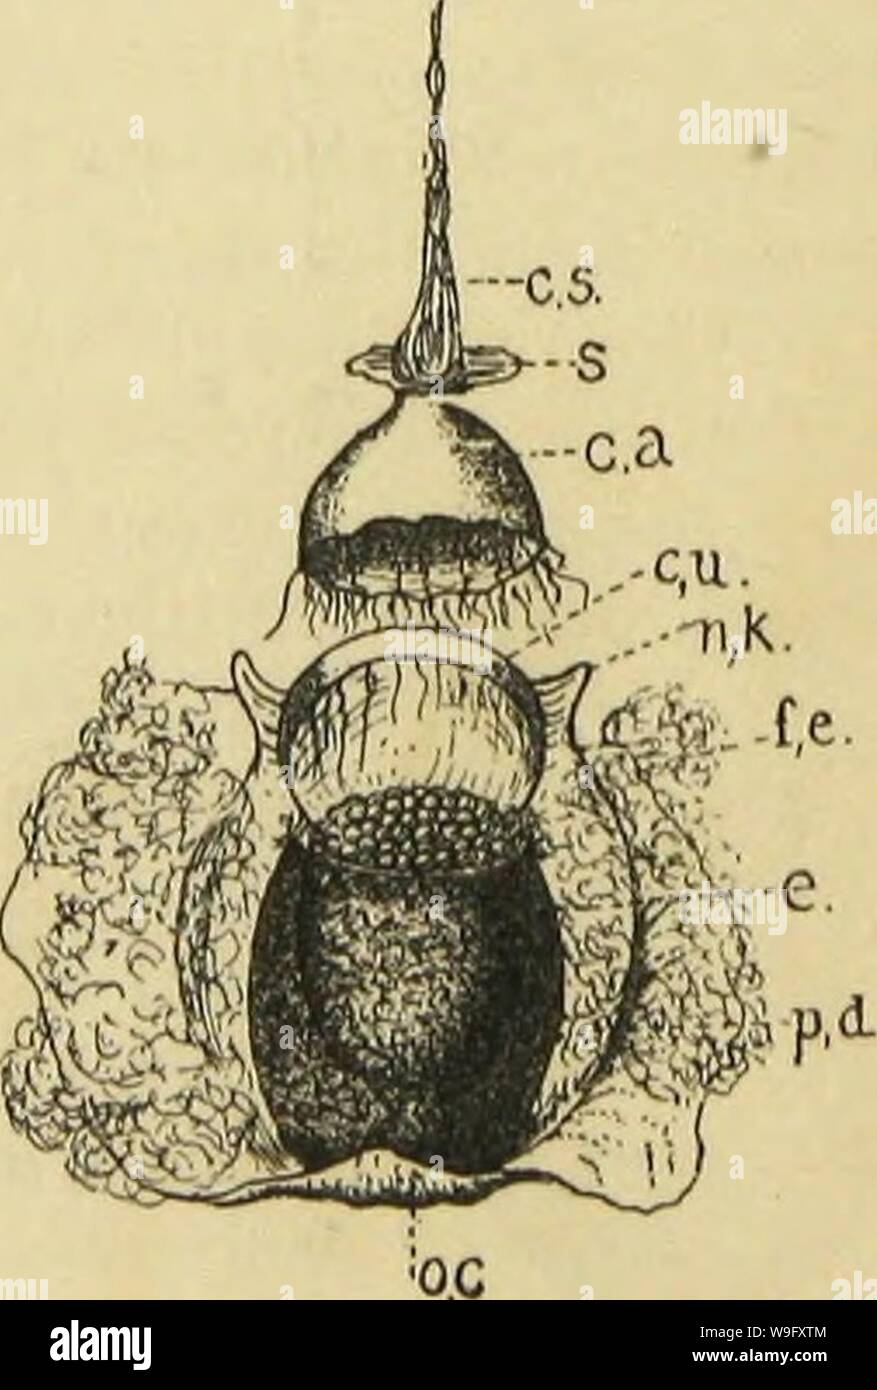 Archive image from page 81 of American spiders and their spinning. American spiders and their spinning work. A natural history of the orbweaving spiders of the United States, with special regard to their industry and habits  CUbiodiversity1121211-9810 Year: 1889 ( Fig. 43. Section view of cocoon of Argiope cophinaria. fe, flossy envelope inside the outer case, oc; p.d, the brown padding; c.ii, the cup or dish against which the eggs (e) are deposited; c.a, cap covering the egg cup ; c.s, suspen- sion cord. is filled with a (Figs. 43, 44, o.c) is usually a thin, stiff, parchment like substance, Stock Photo